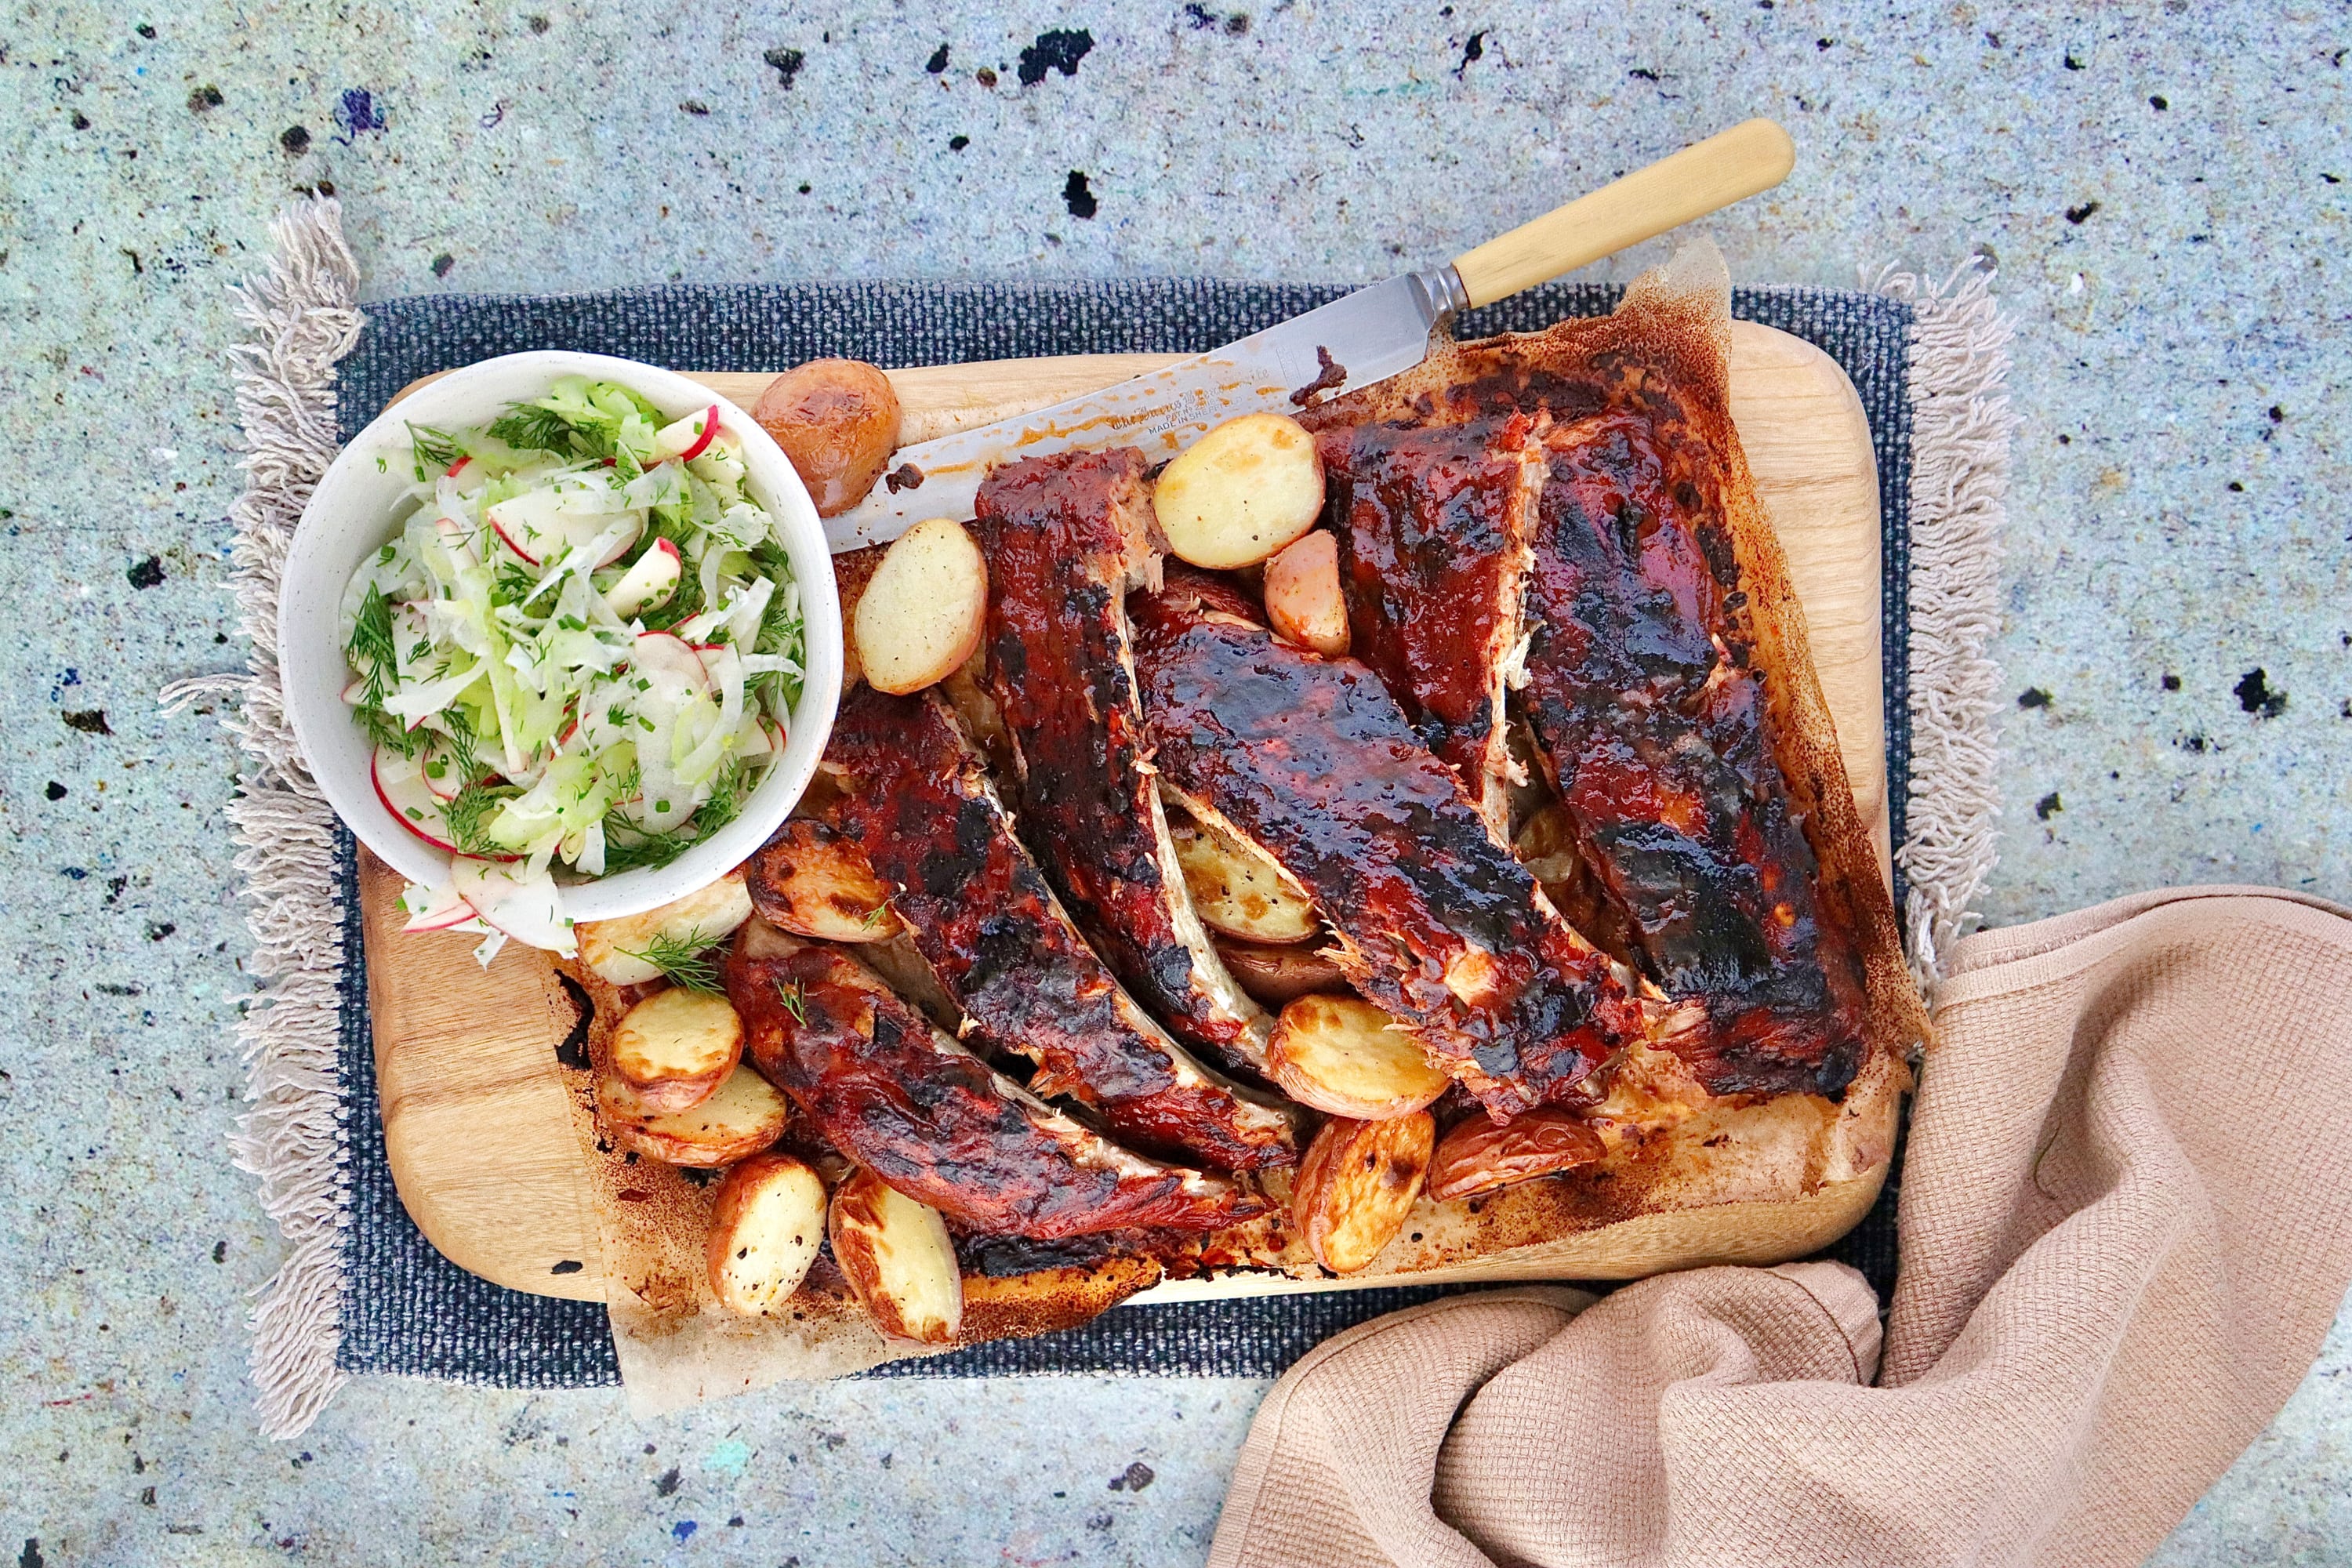 American Style Pork Ribs with fennel and celery salad and roasted potatoes